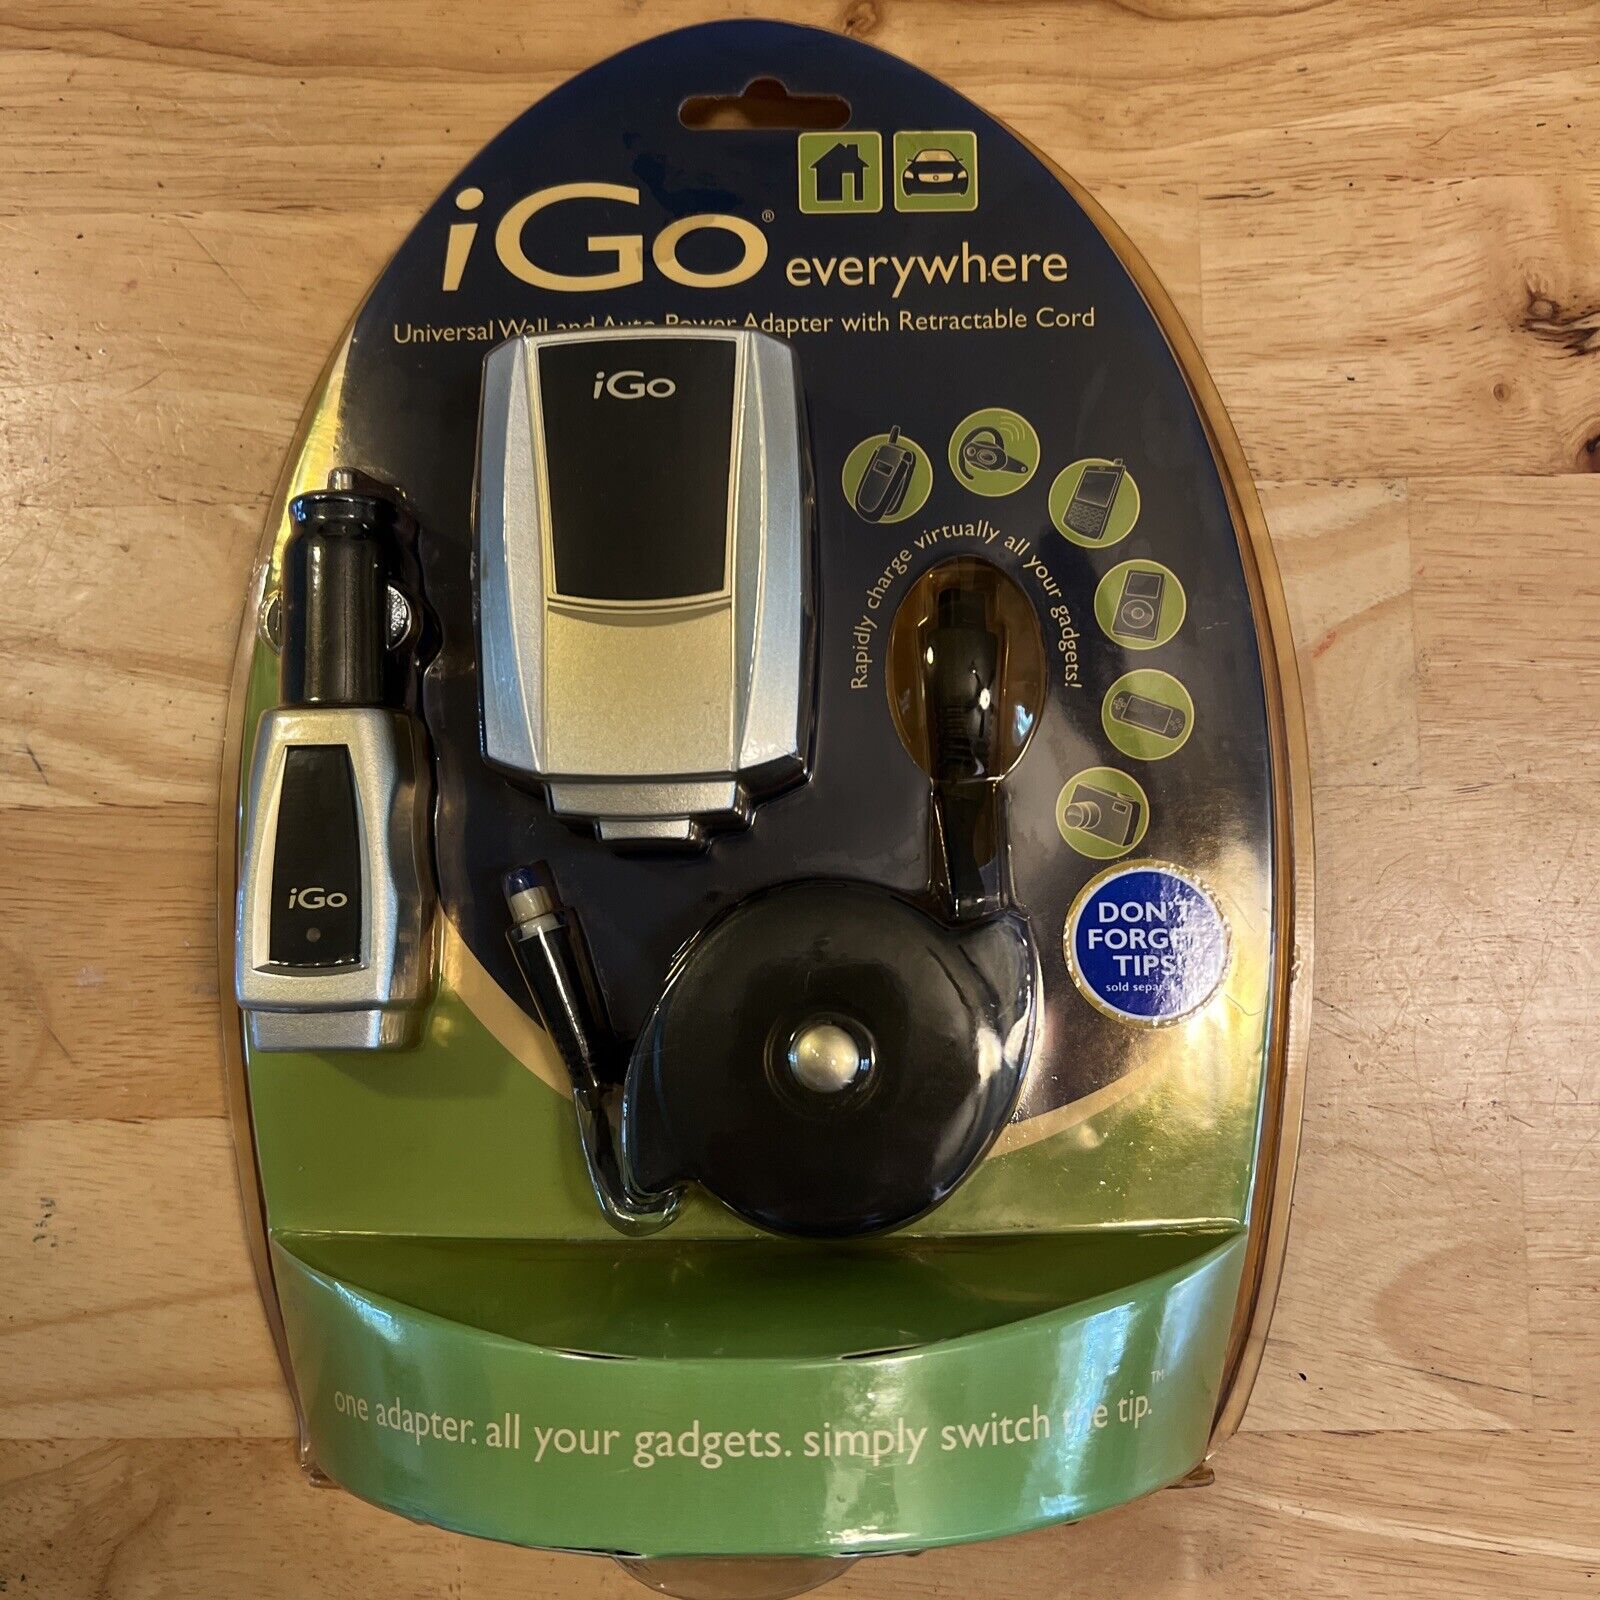 iGo everywhere Universal Wall and Auto Power Adapter with Retractable Cord New